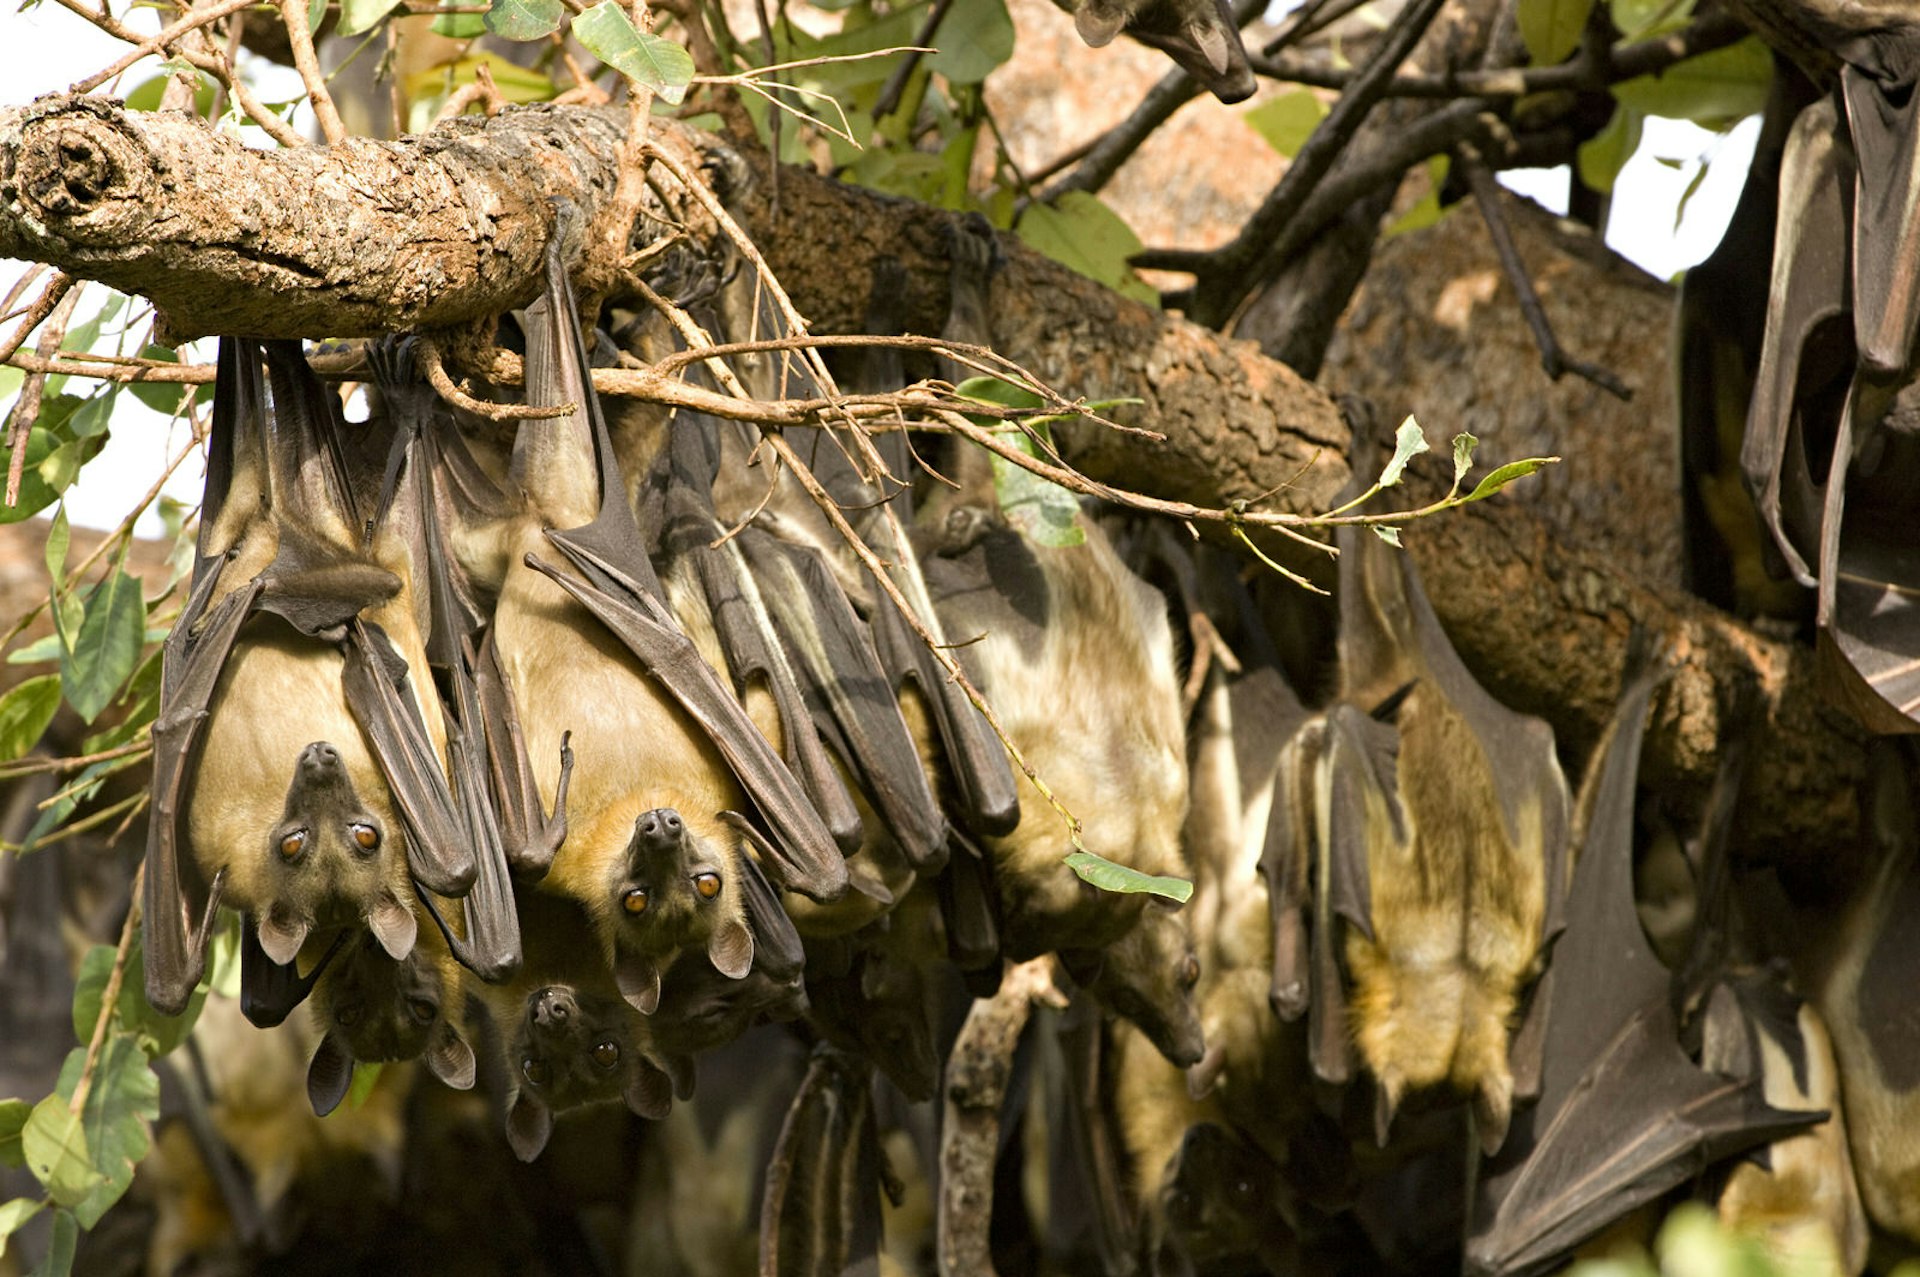 A tree branch is laden with countless straw-coloured fruit bats hanging upside down.